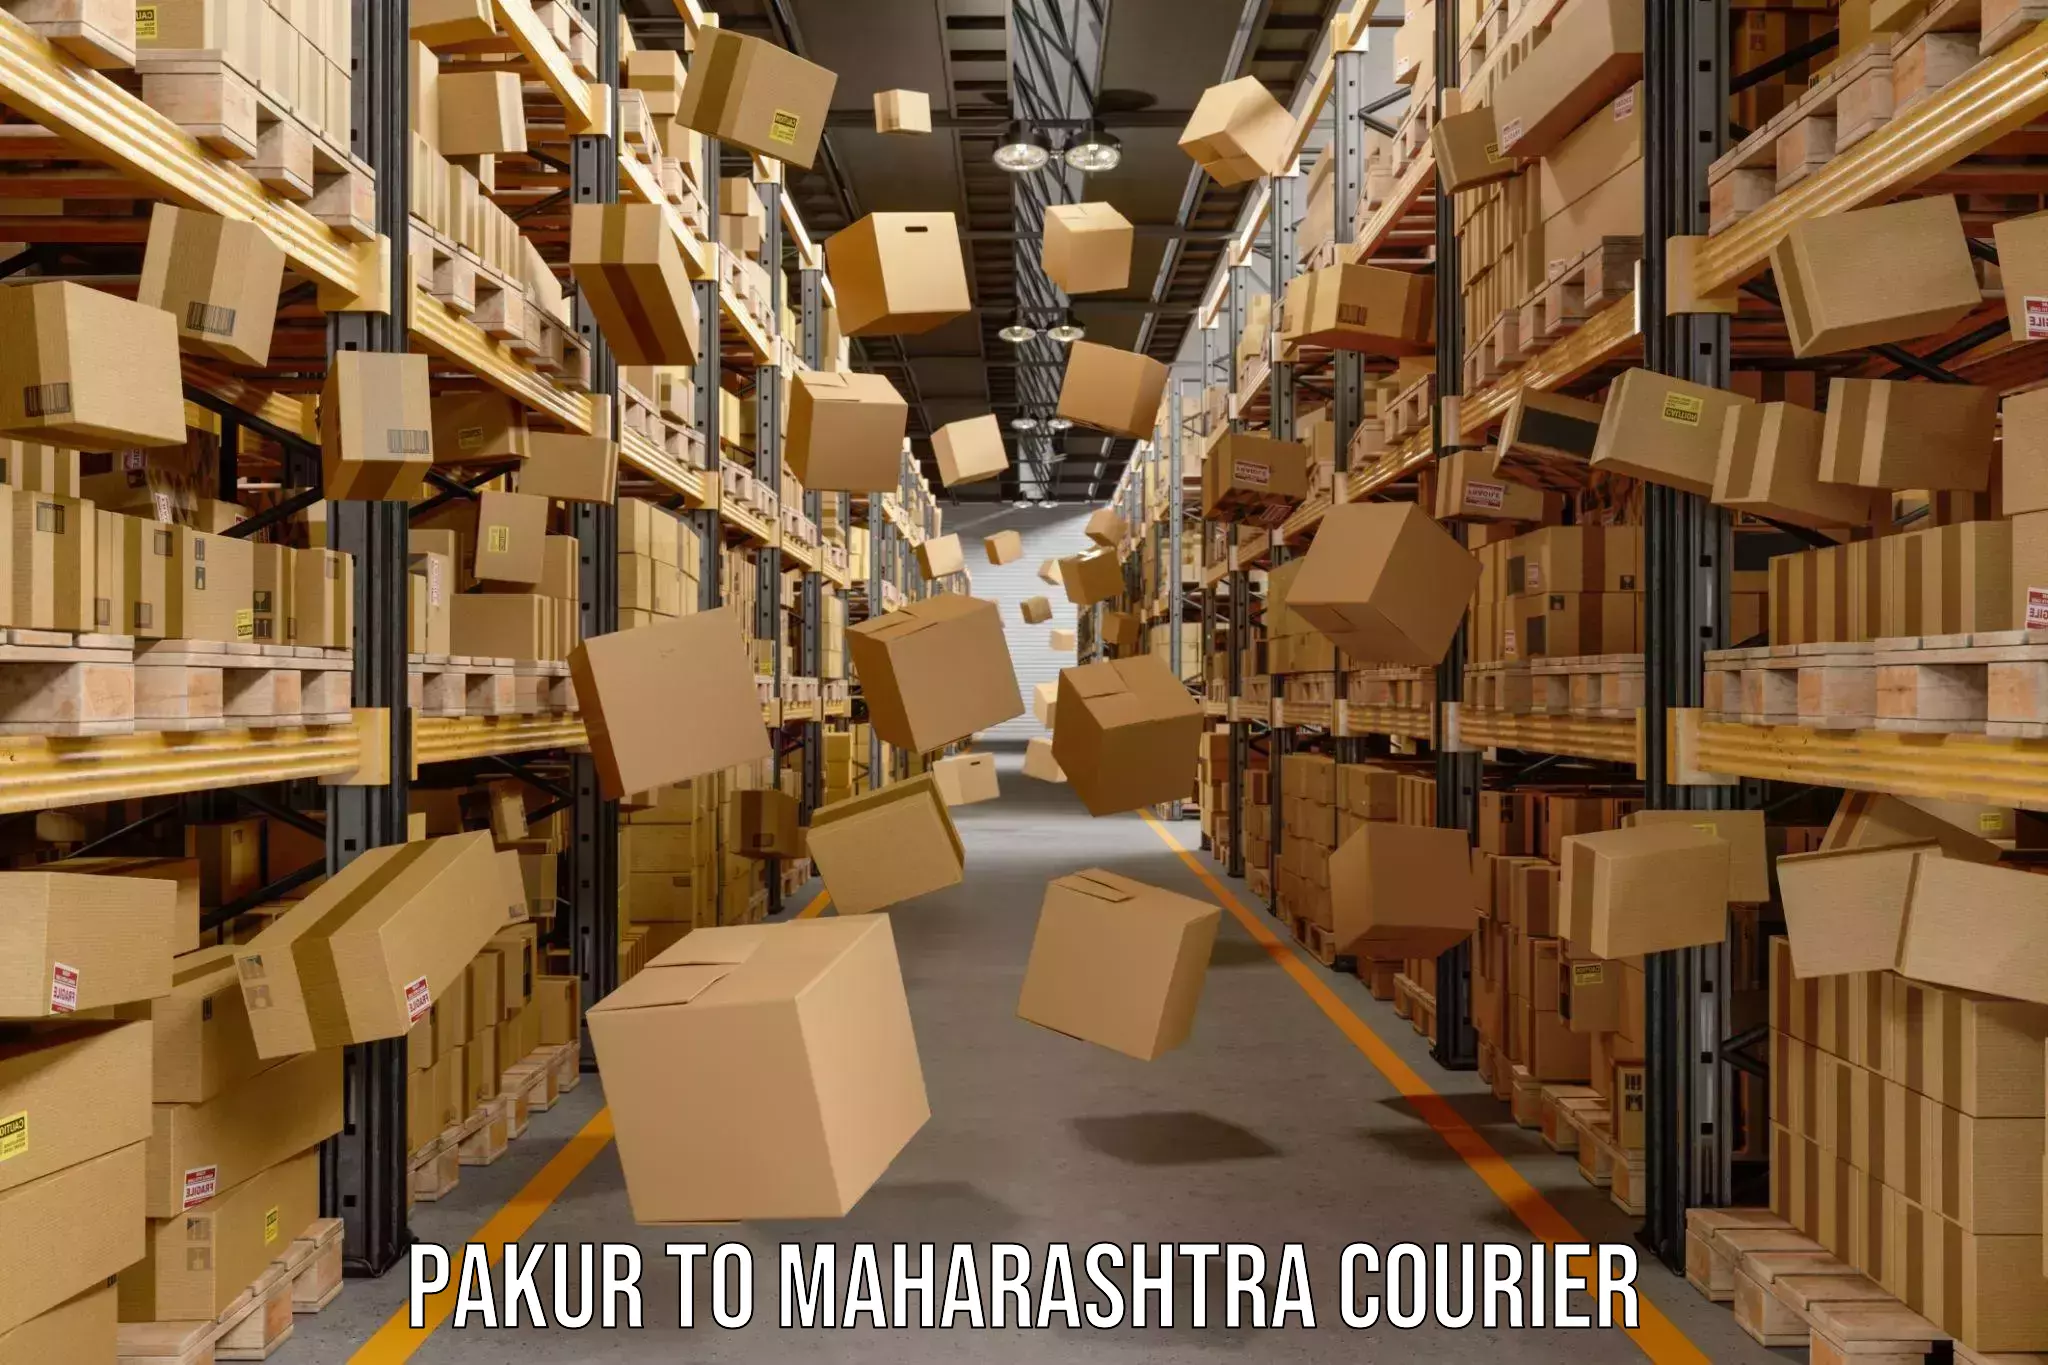 Professional courier services Pakur to Alibag